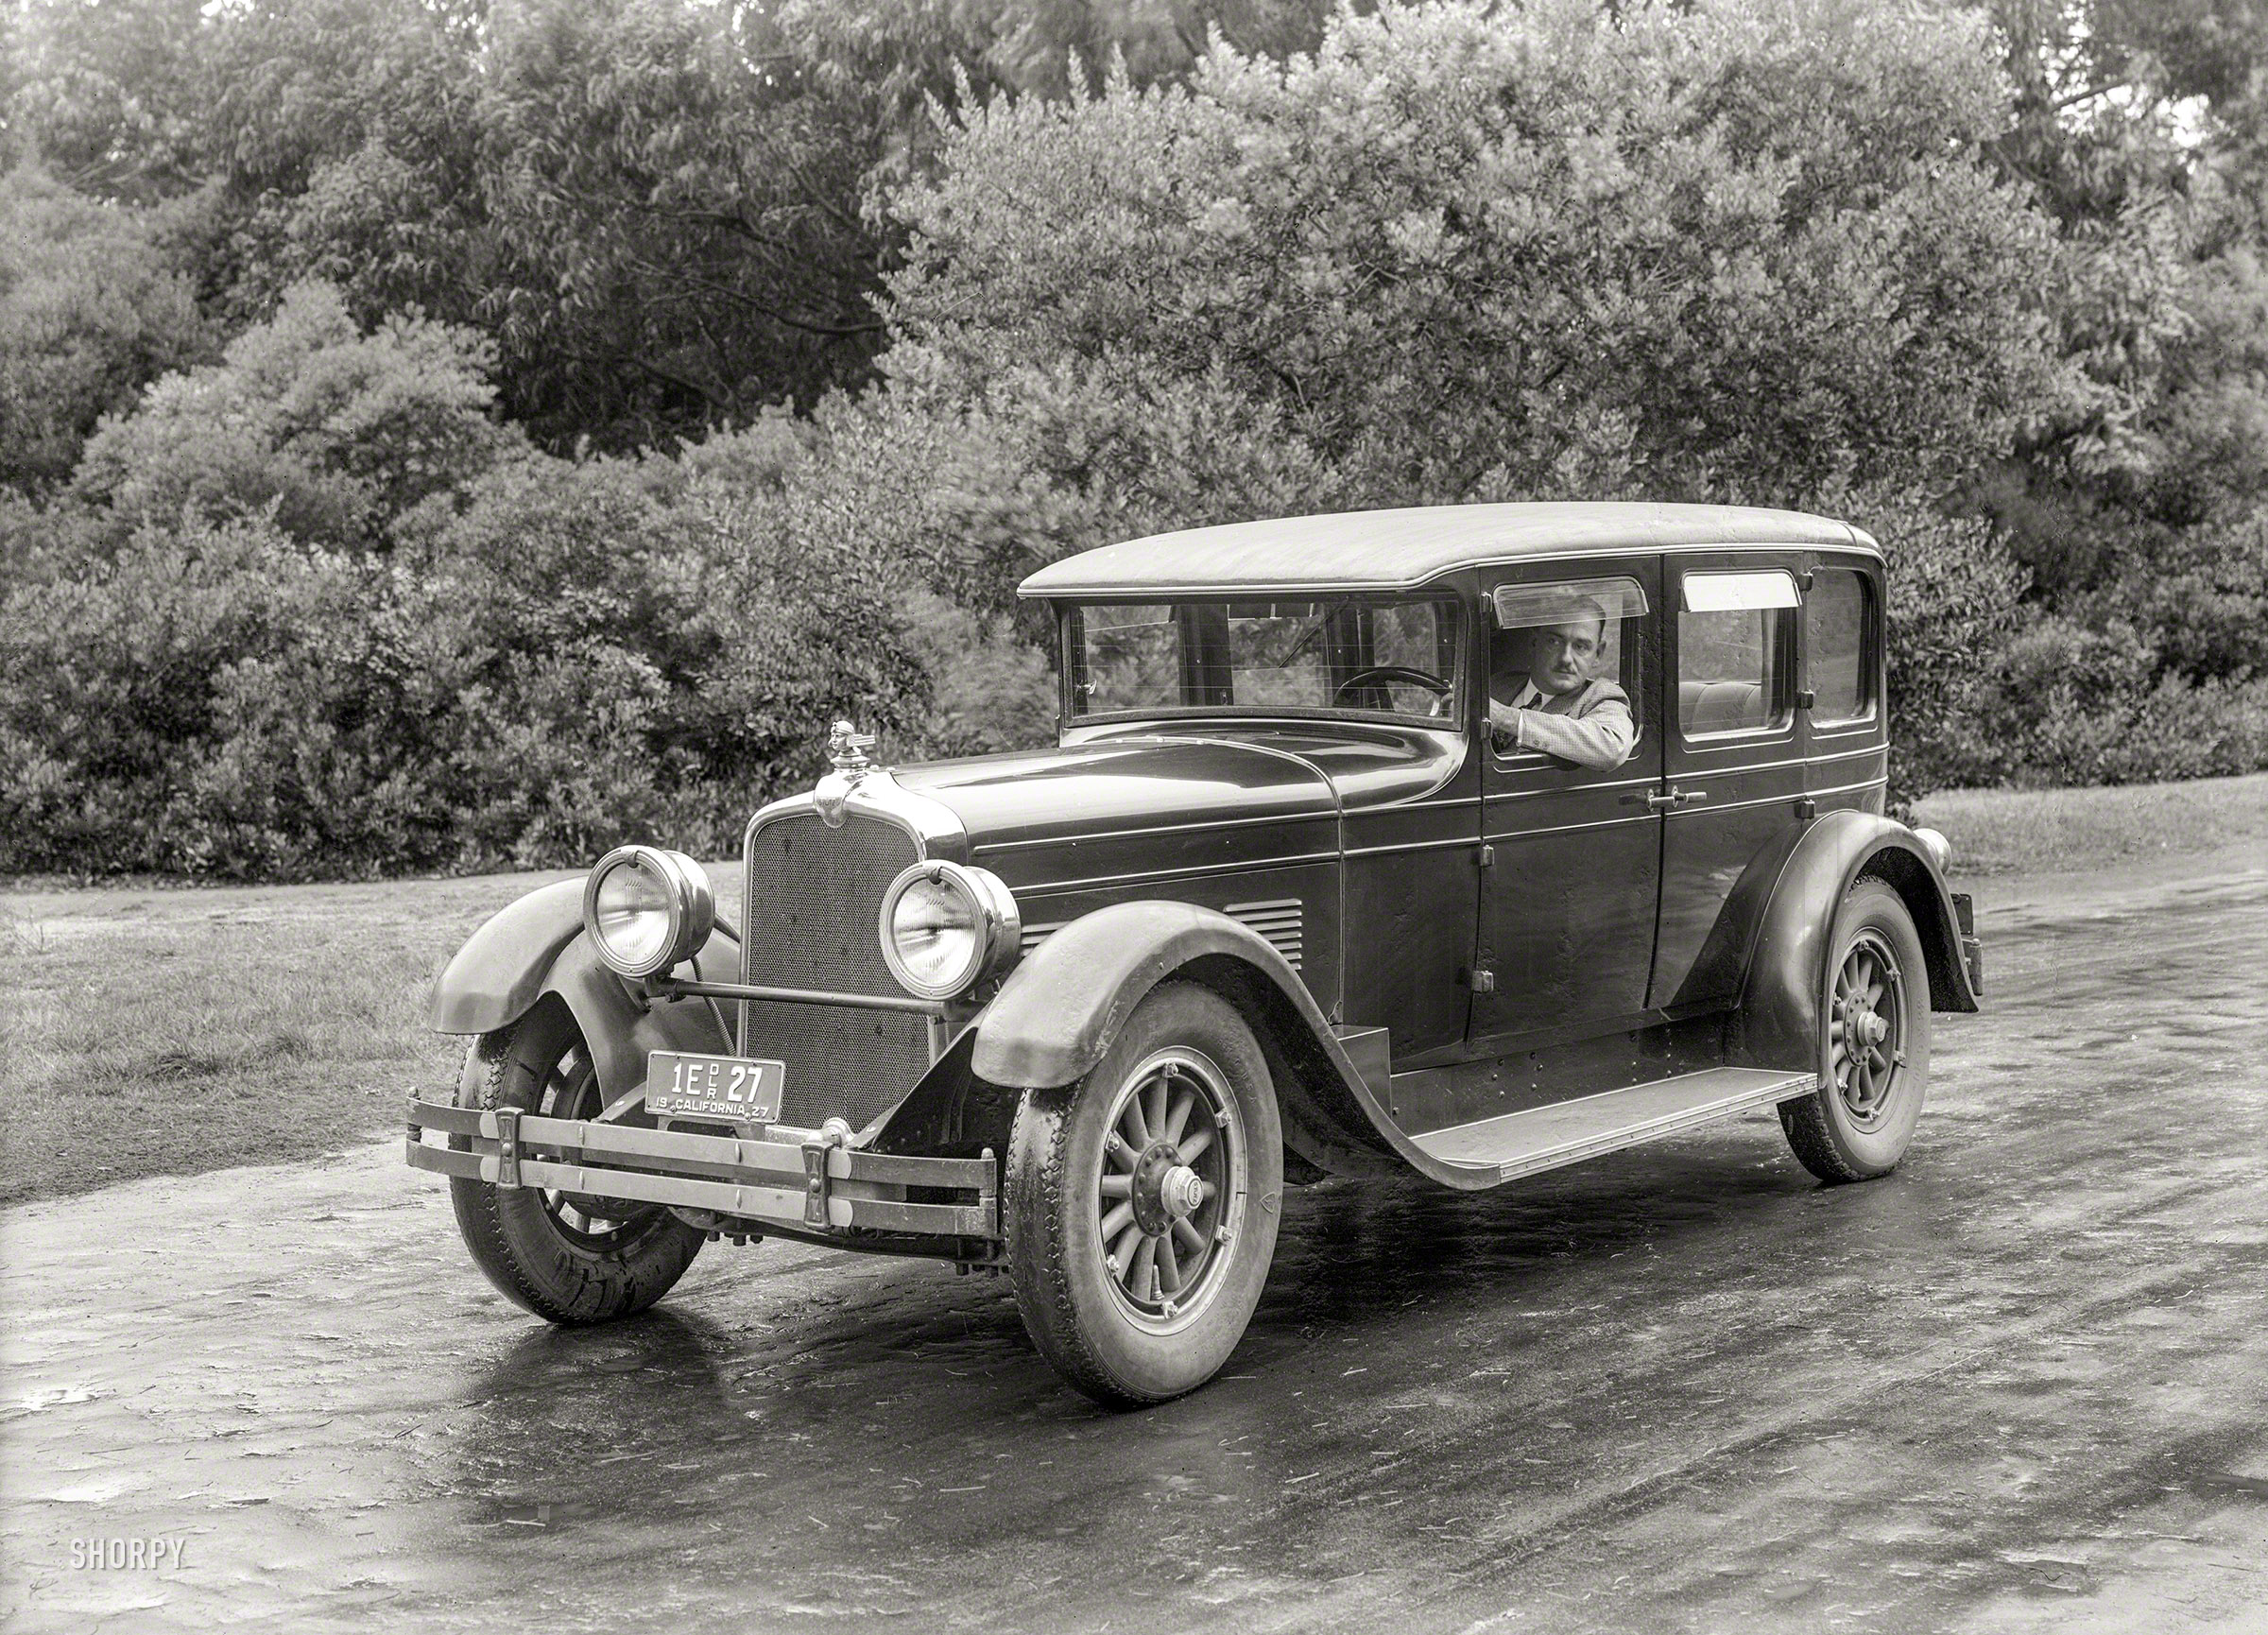 San Francisco, 1927. "Stutz Vertical Eight with Safety Chassis." The so-called "Safety Stutz" featured four-wheel hydraulic brakes and wire-reinforced, supposedly shatterproof glass -- just the thing for cruising in the rain on bald tires. 5x7 glass negative by Chris Helin. View full size.